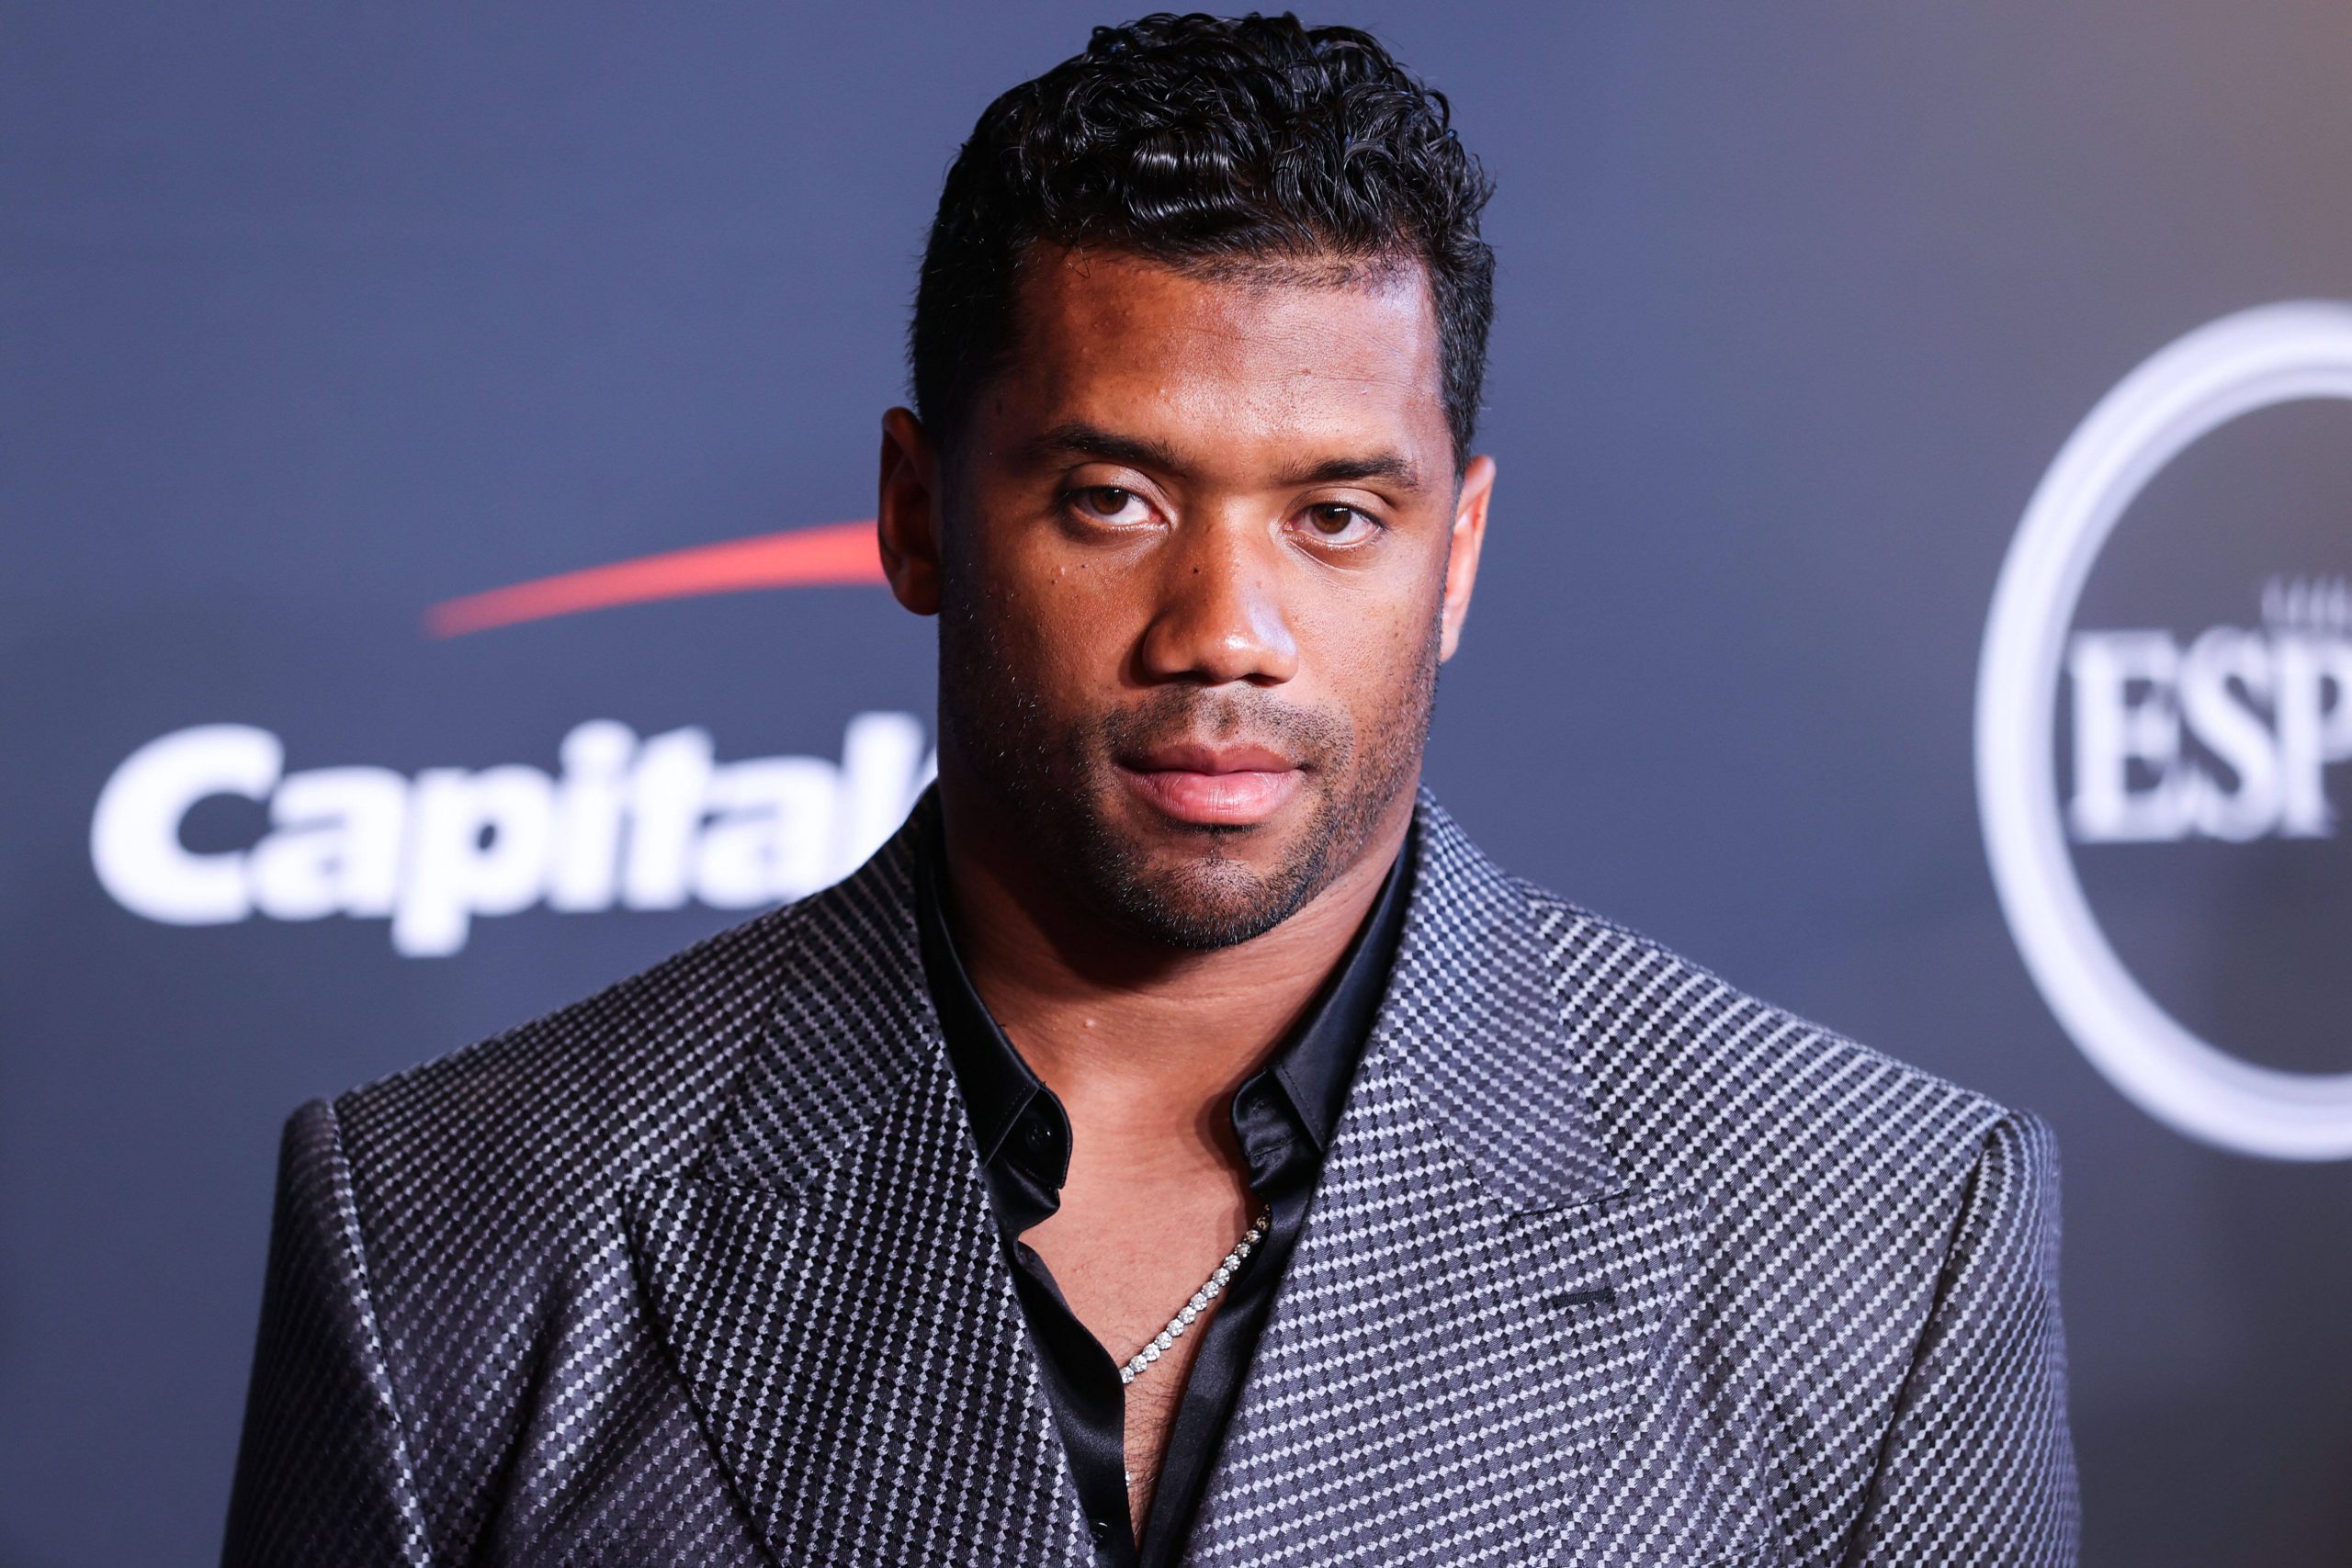 2022 ESPY Awards American football quarterback for the Denver Broncos of the National Football League Russell Wilson arrives at the 2022 ESPY Awards held at the Dolby Theatre on July 20, 2022 in Hollywood, Los Angeles, California, United States. Dolby Theatre, Hollywood, Los Angeles, California California United States PUBLICATIONxNOTxINxFRA Copyright: xImagexPressxAgencyx originalFilename: collin-2022espy220721_npVtb.jpg